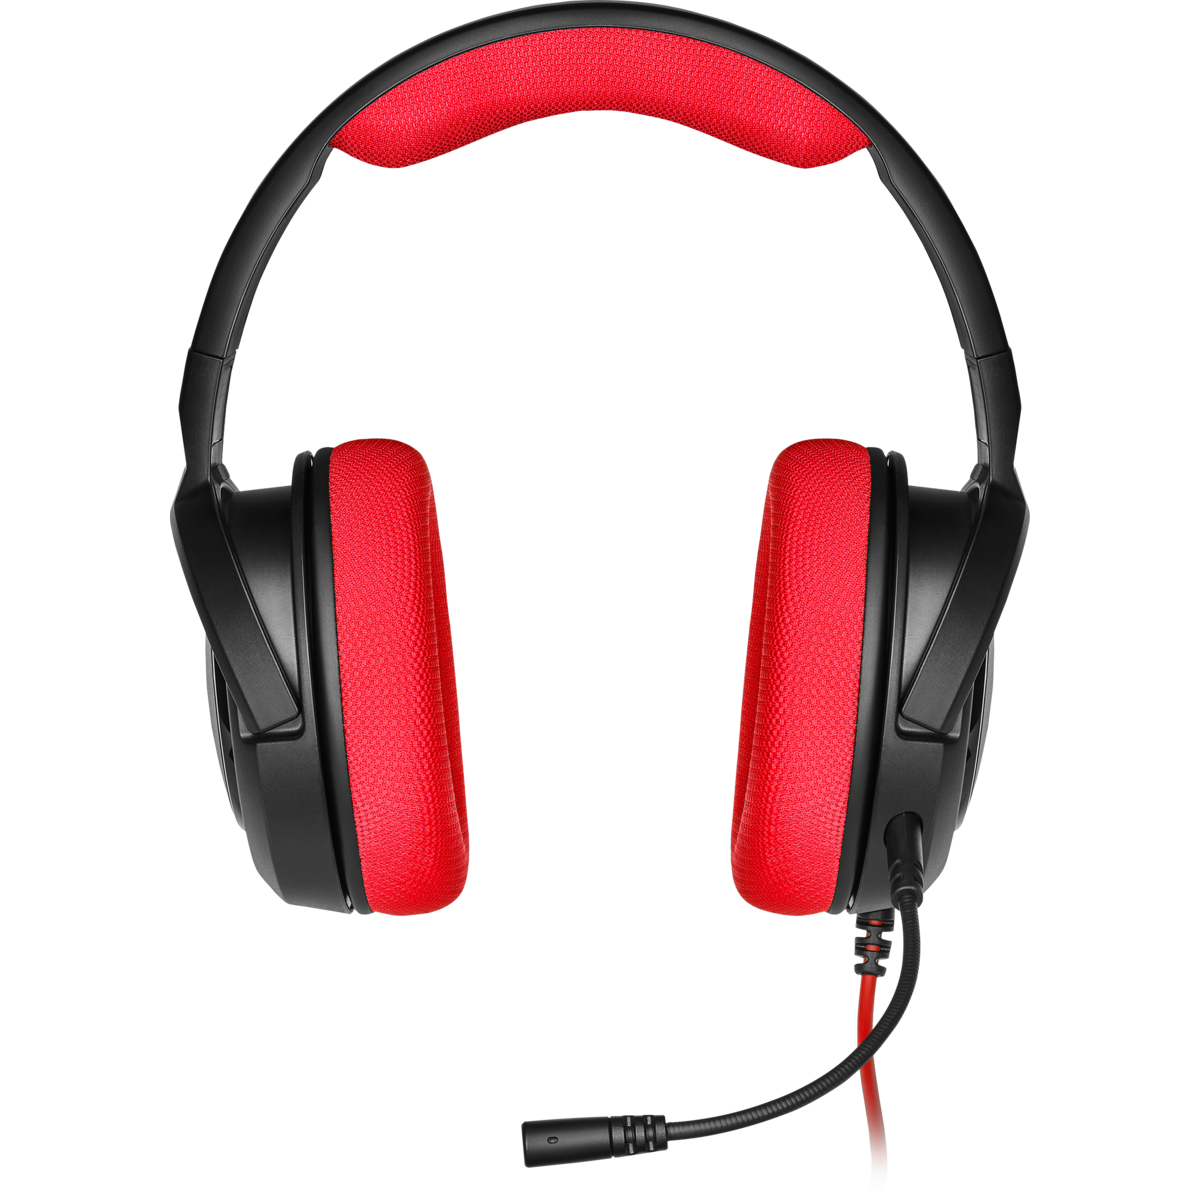 HEADSET CORSAIR HS35 STEREO GAMING RED 3.5 MM CA-9011198-NA